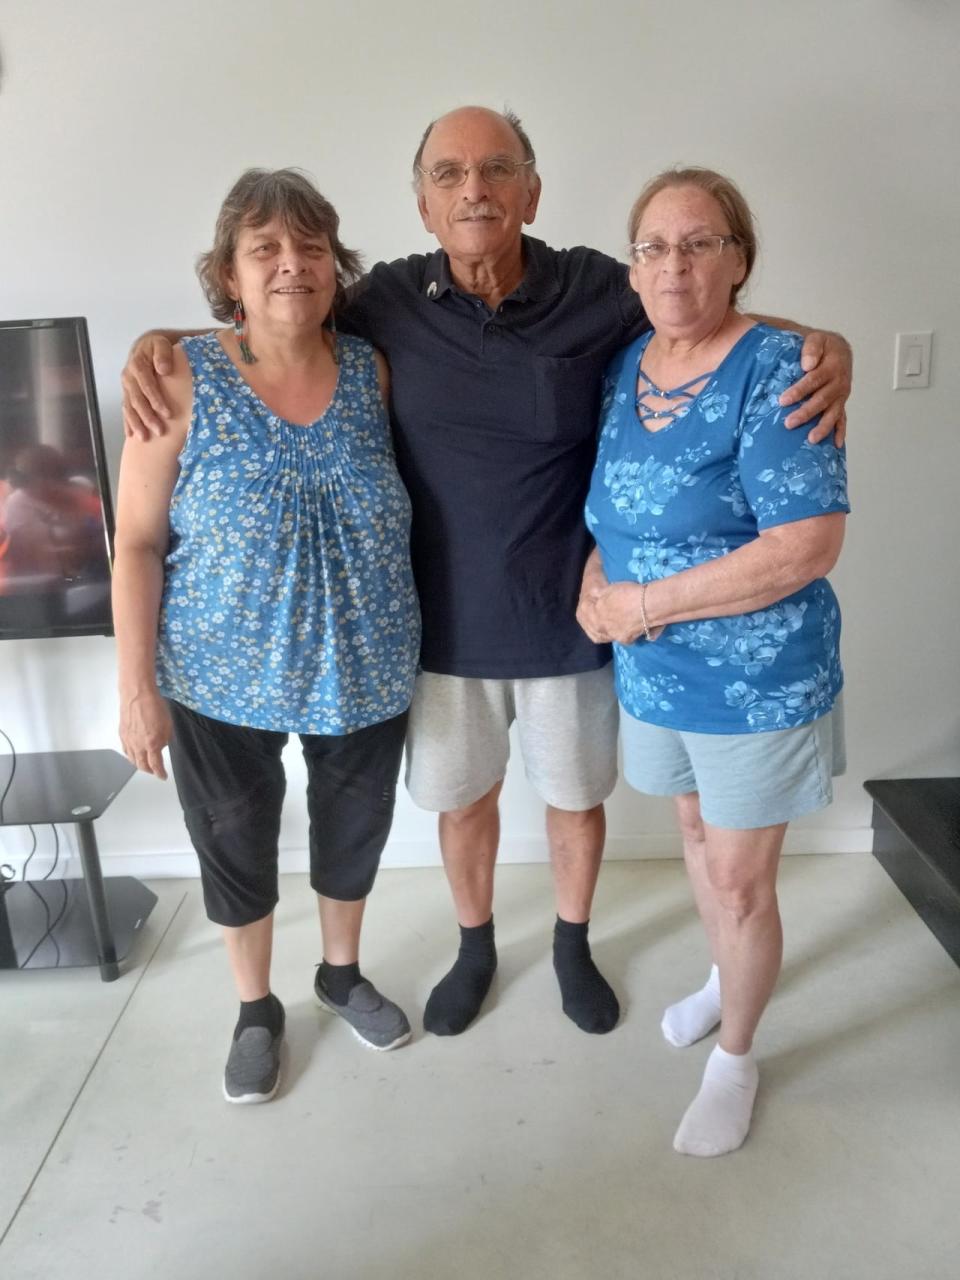 Ambrose is pictured with his sisters, Leona and Valerie. He says his biological parents' memories live on through them.